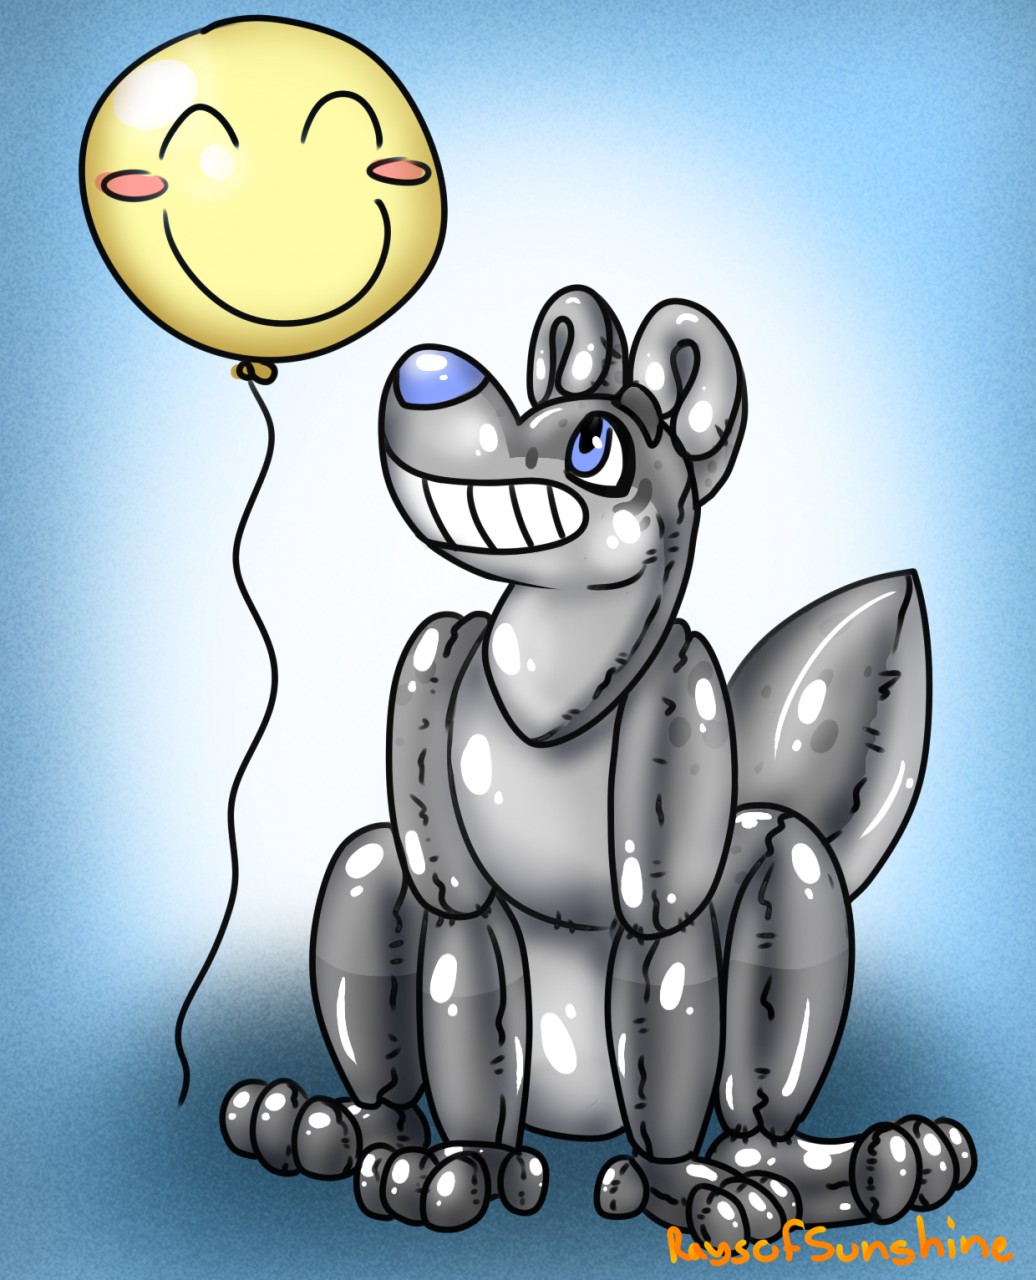 anthro anthros balloon canine inflatable johnnyblanco mammal pool_toy raysofsunshine umbreveon wolf